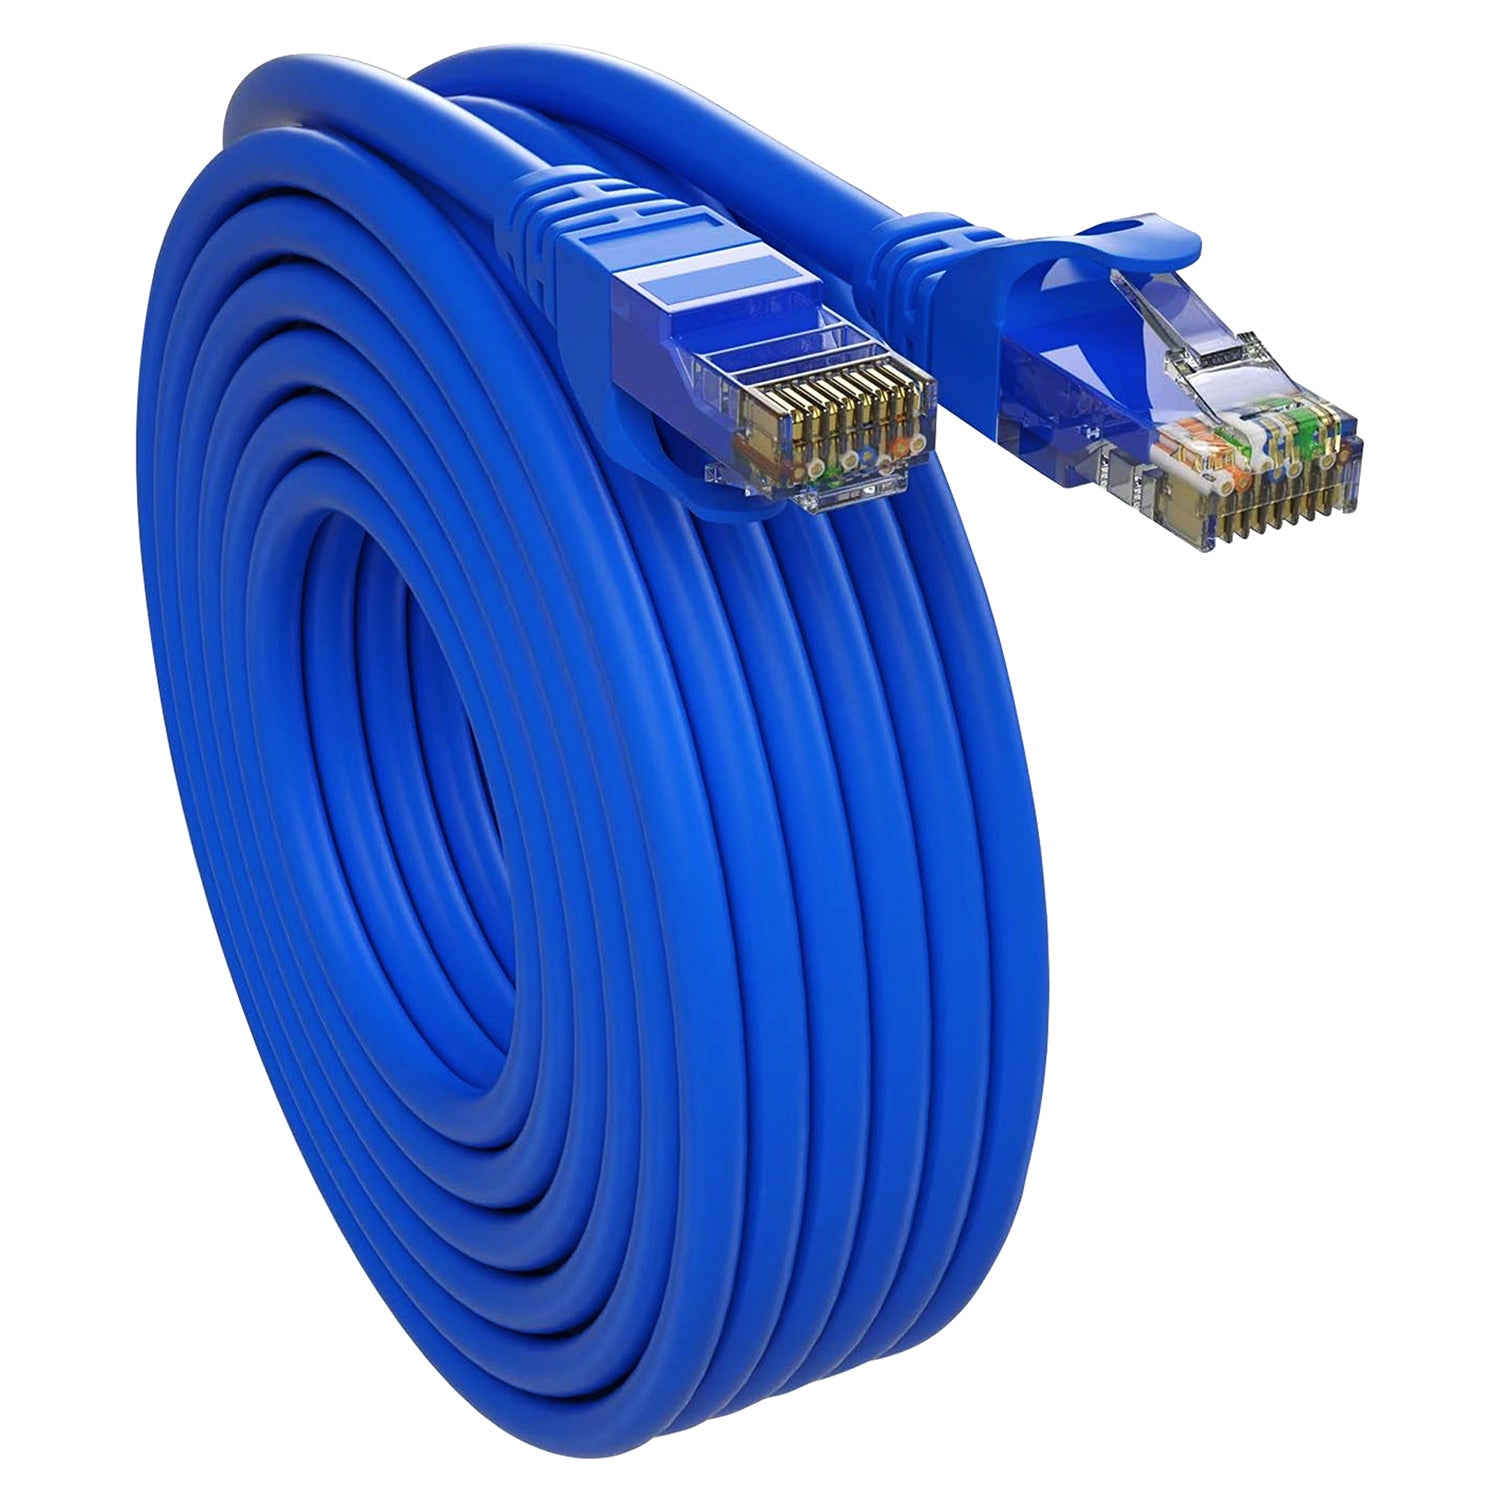 5 Core Cat 6 Ethernet Cable 20ft 10Gbps Network Patch Cord High Speed LAN Cable